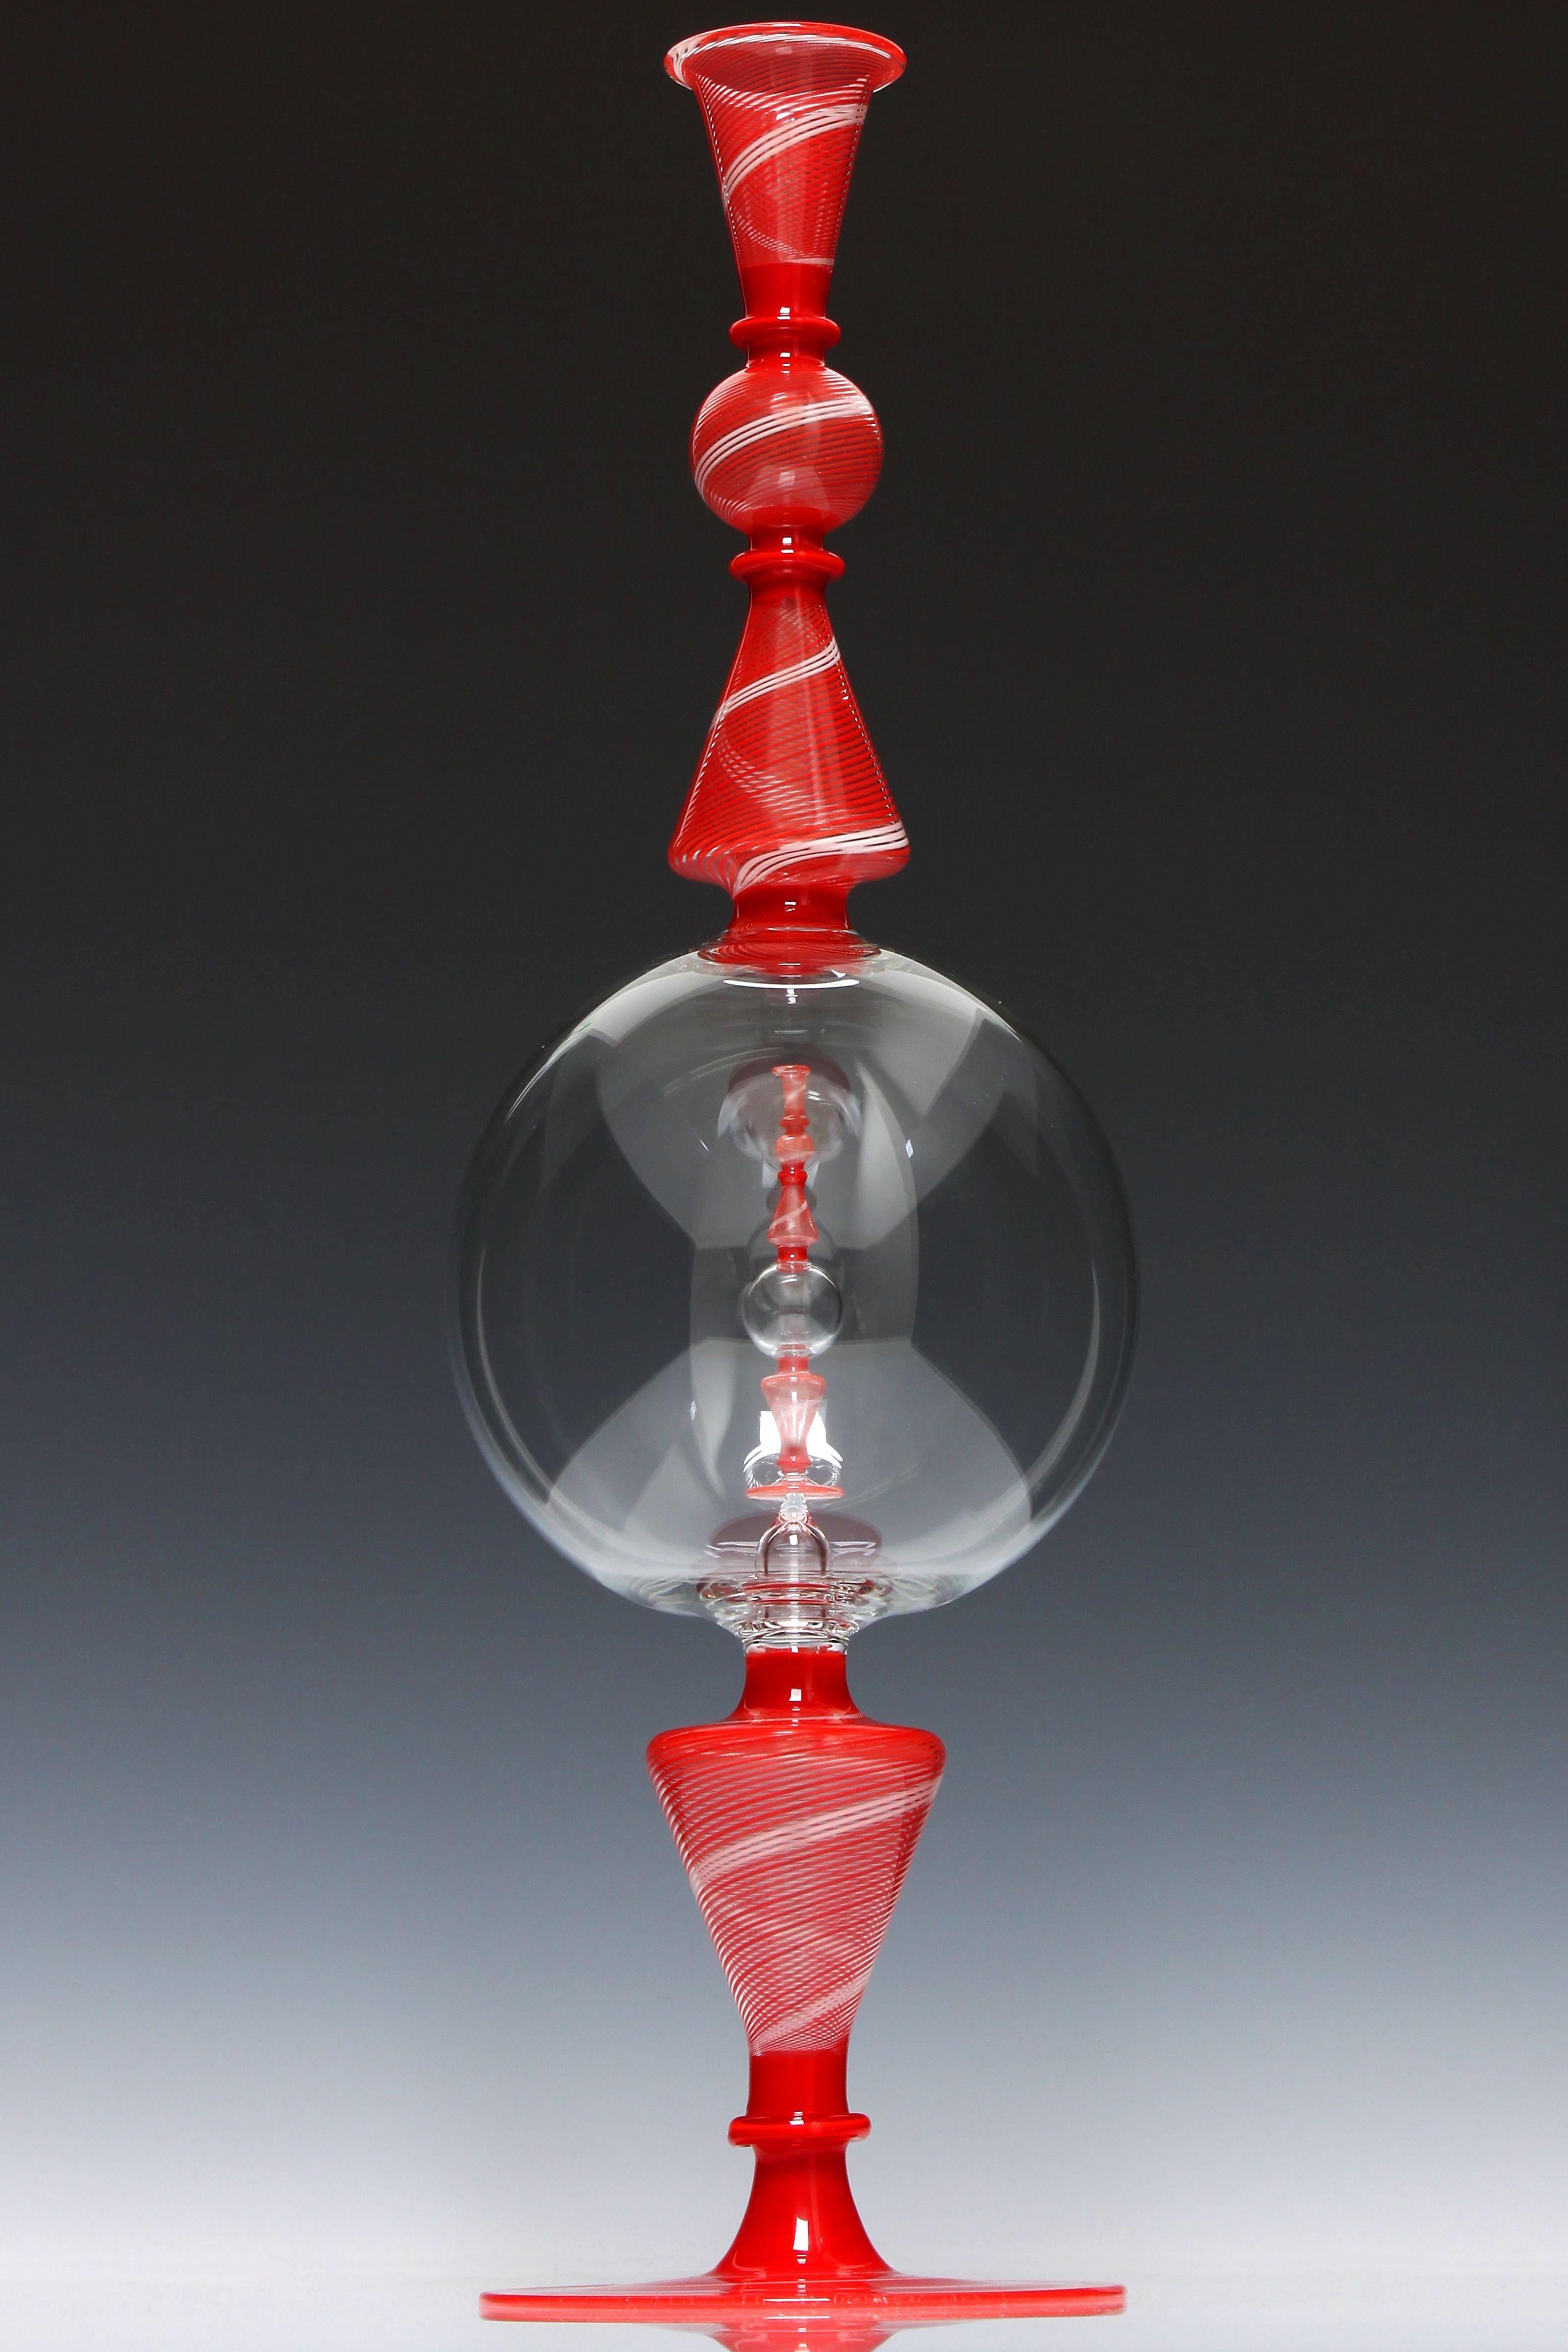 Red Bottle in a Bottle - Sculpture by Kiva Ford